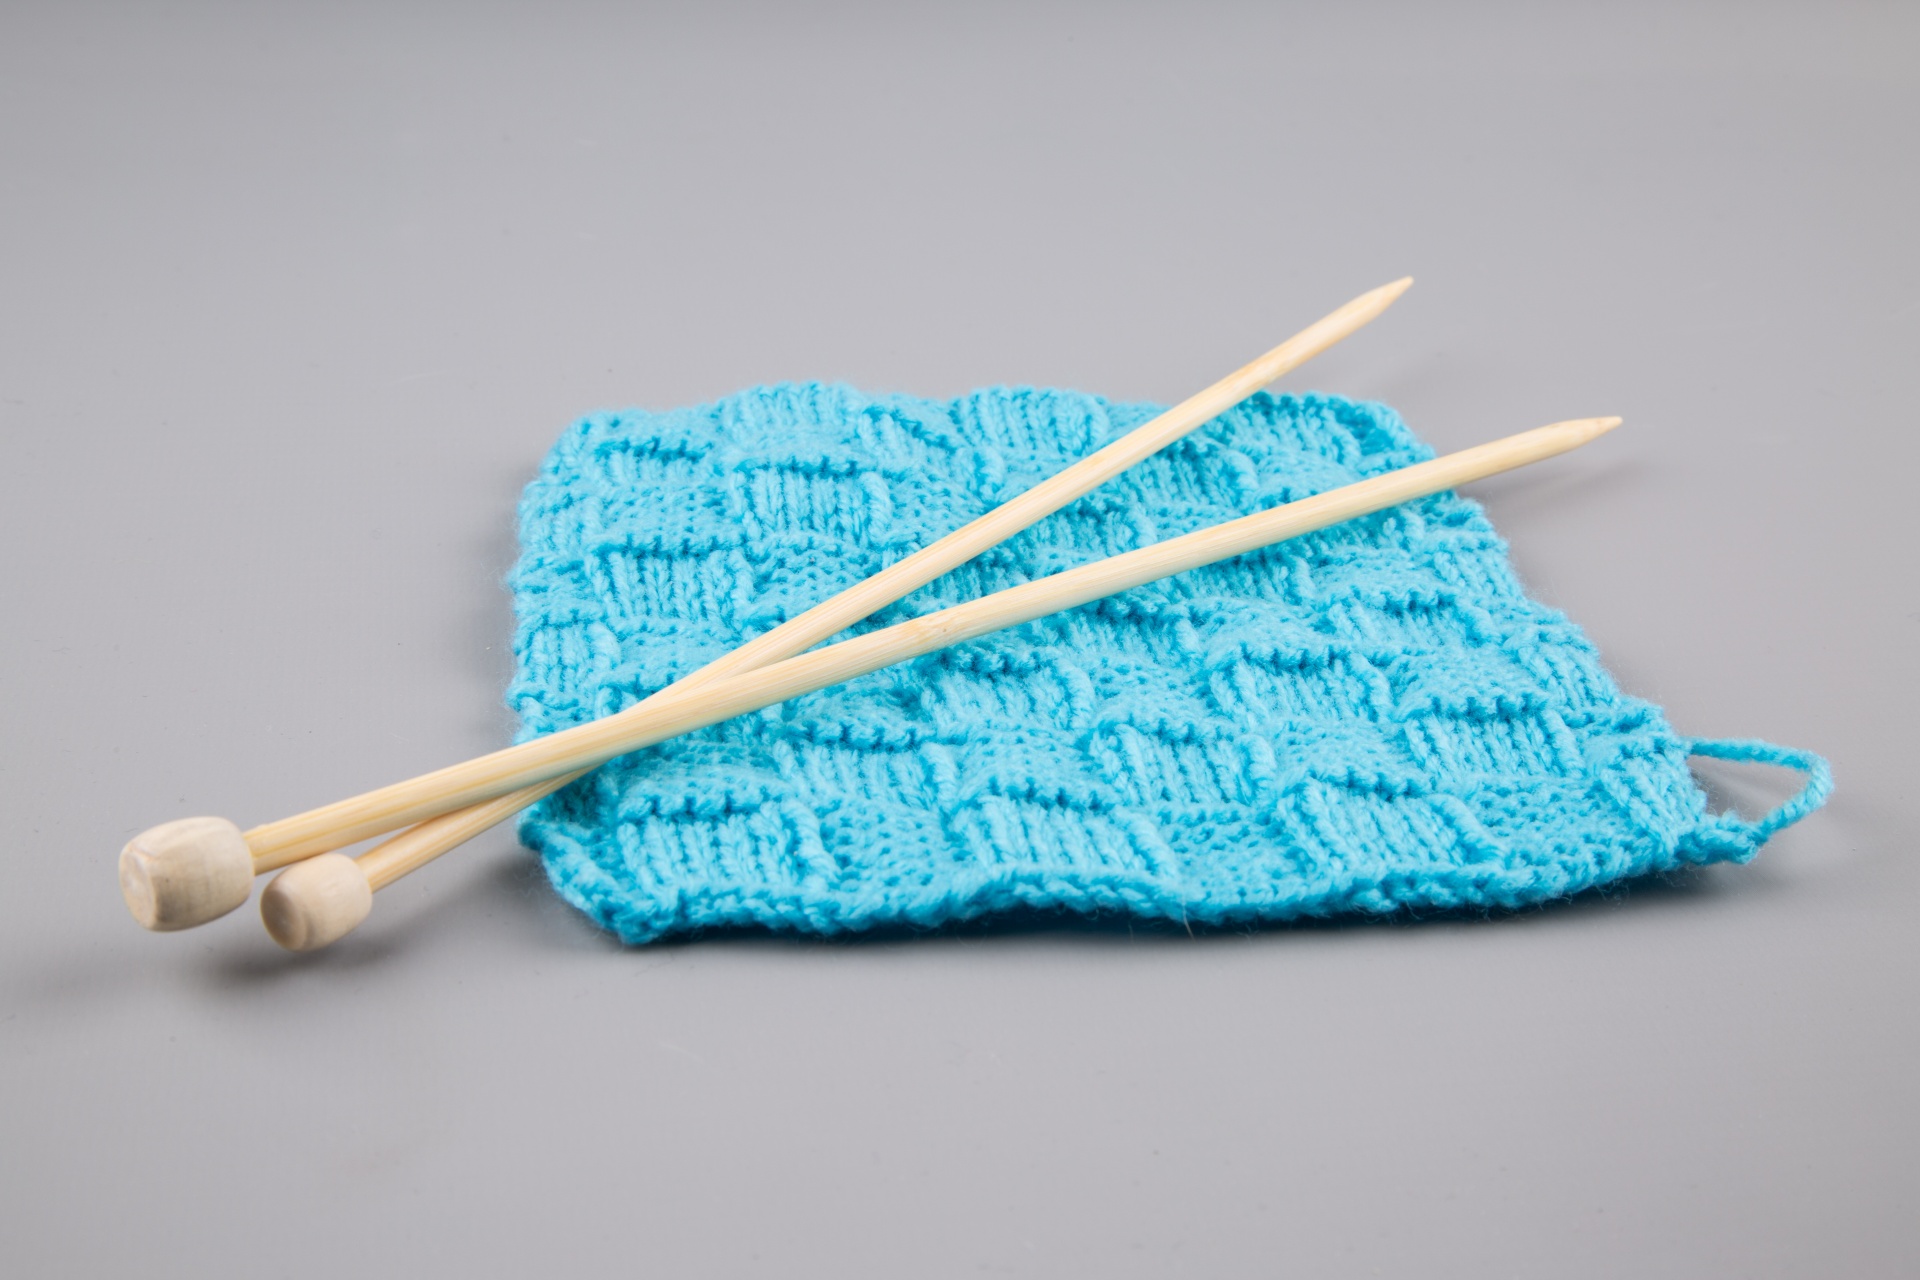 Image of a bright blue-teal knit square knit with the basket stitch.  Two wooden knitting needles rest on top of the knit square.